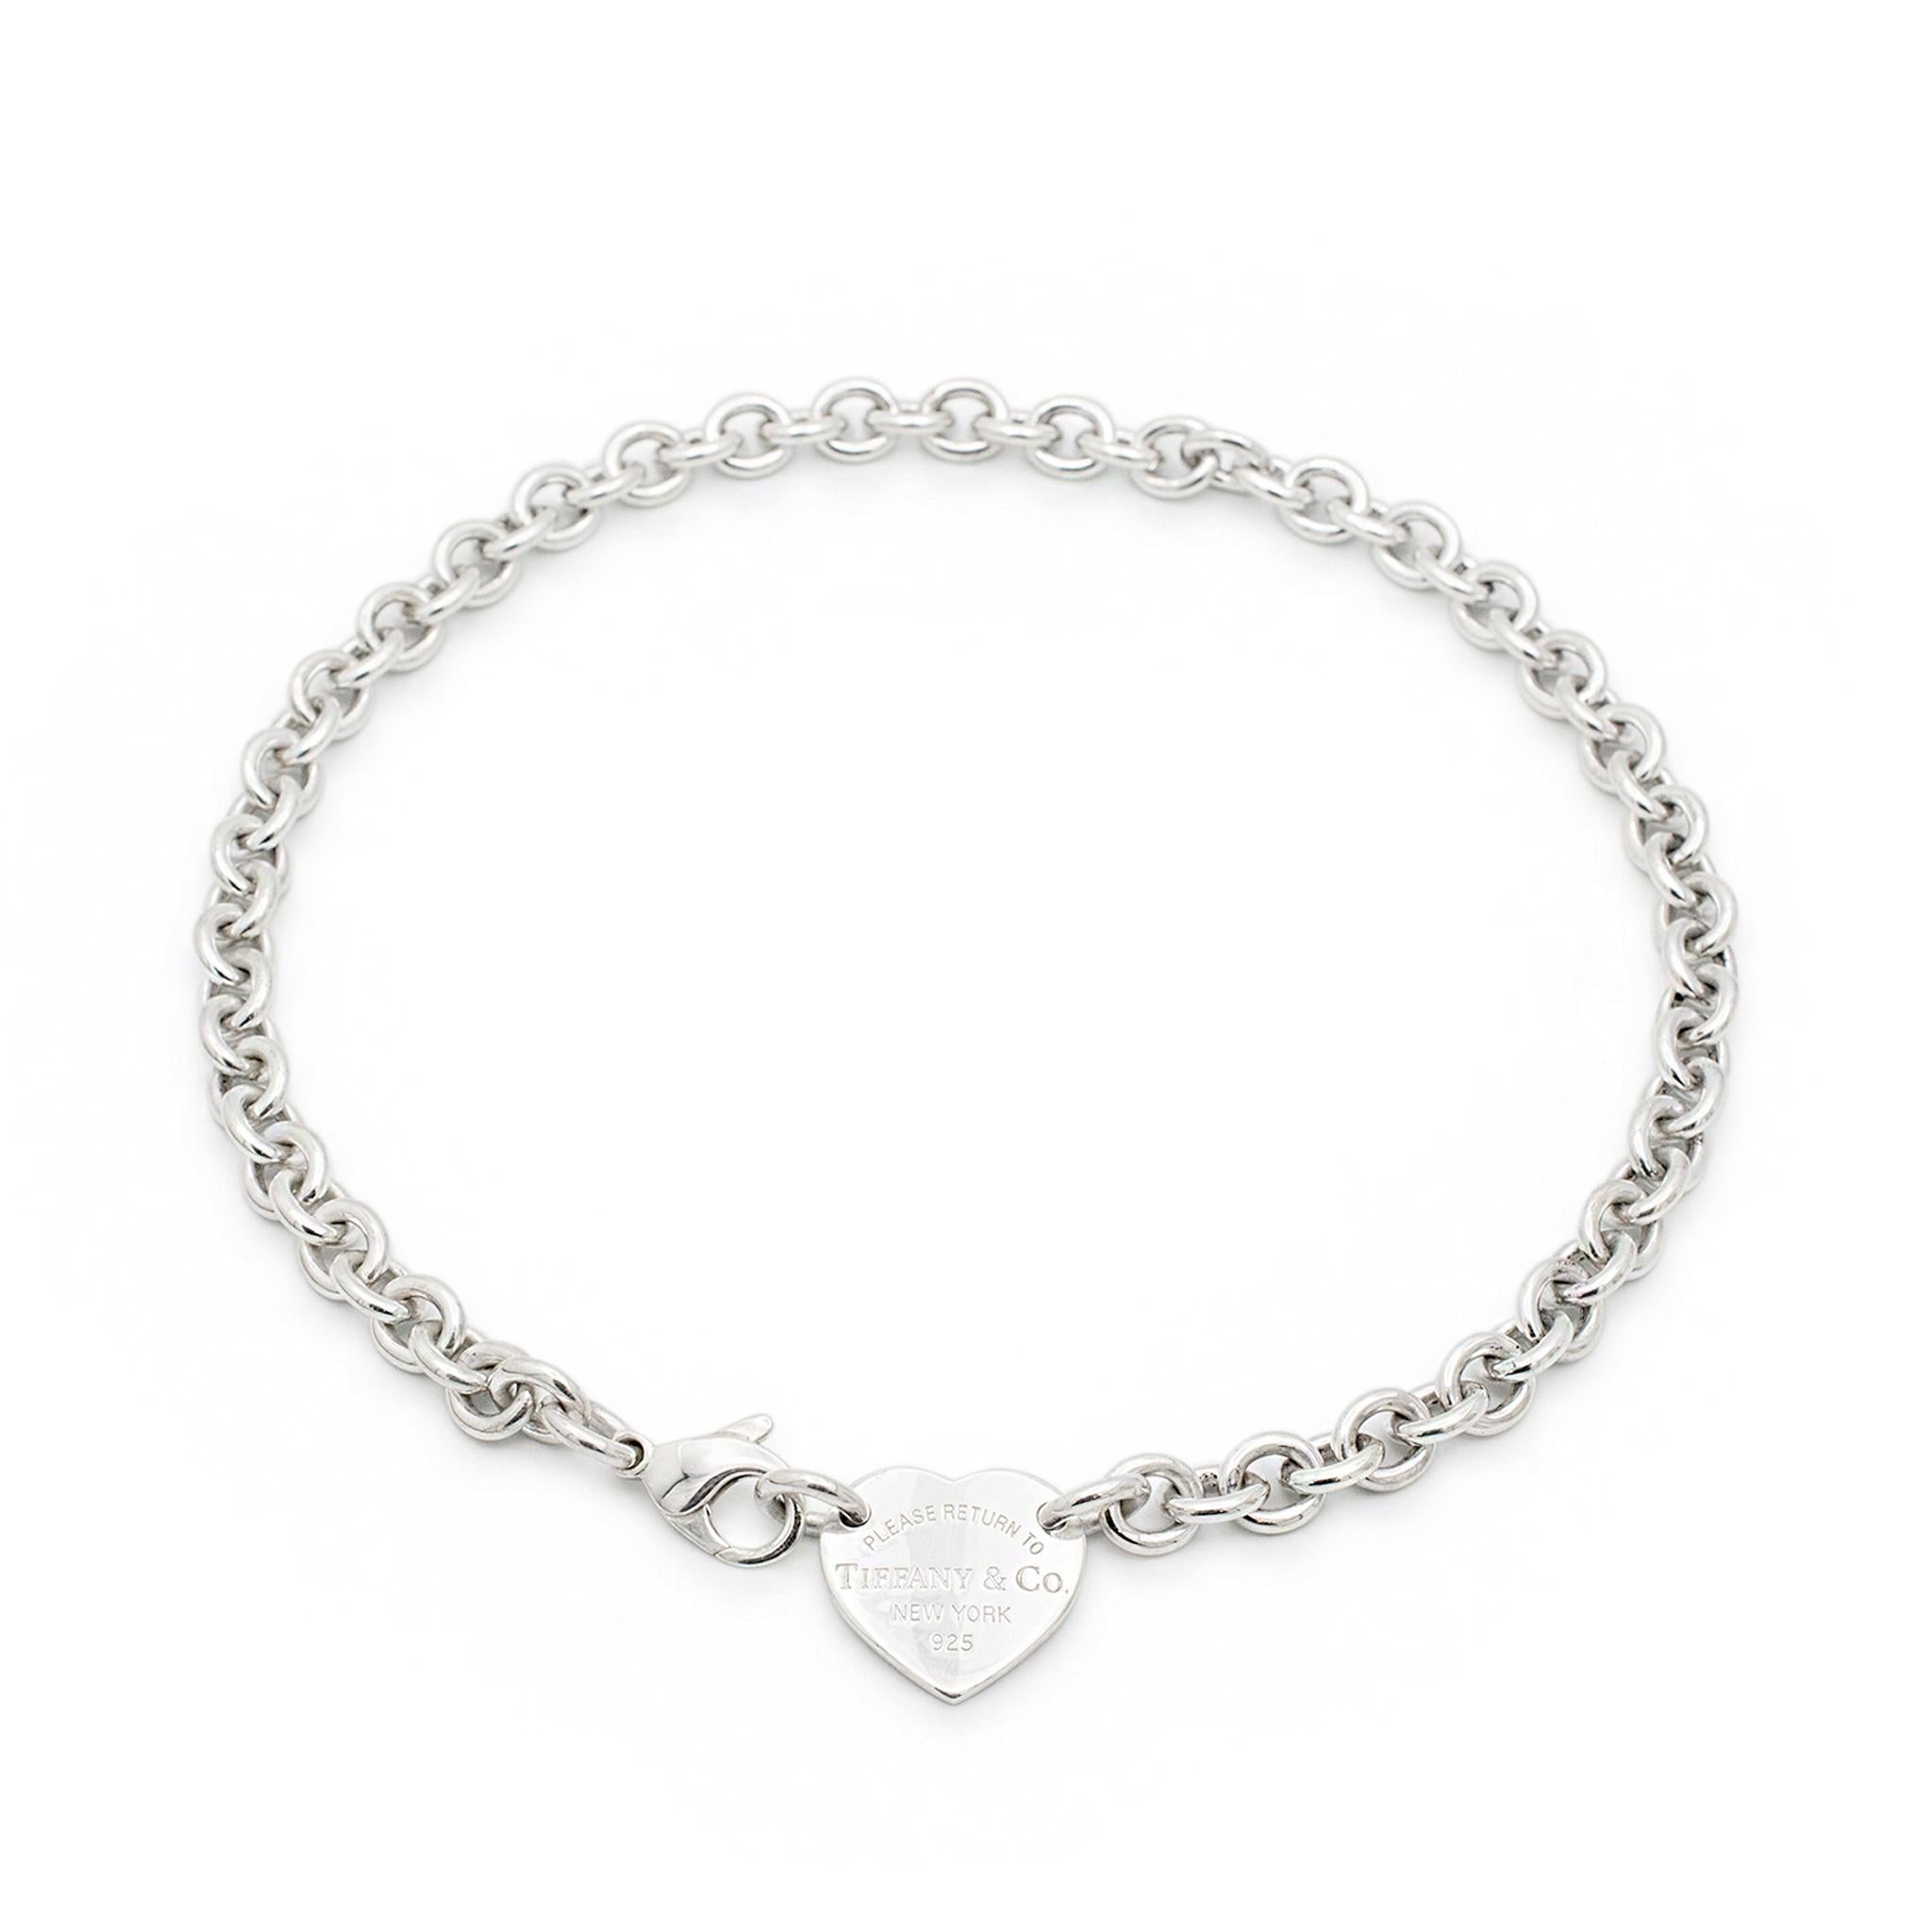 Brand: Tiffany & Co.
Gender: Ladies
Metal Type: 925 Sterling Silver
Length: 15.00 Inches
Chain width: 8.00 mm
Heart Pendant Measurements: 20.00mm x 21.00mm
Weight: 55.00 grams
Ladies silver single strand collar necklace. Engraved with 